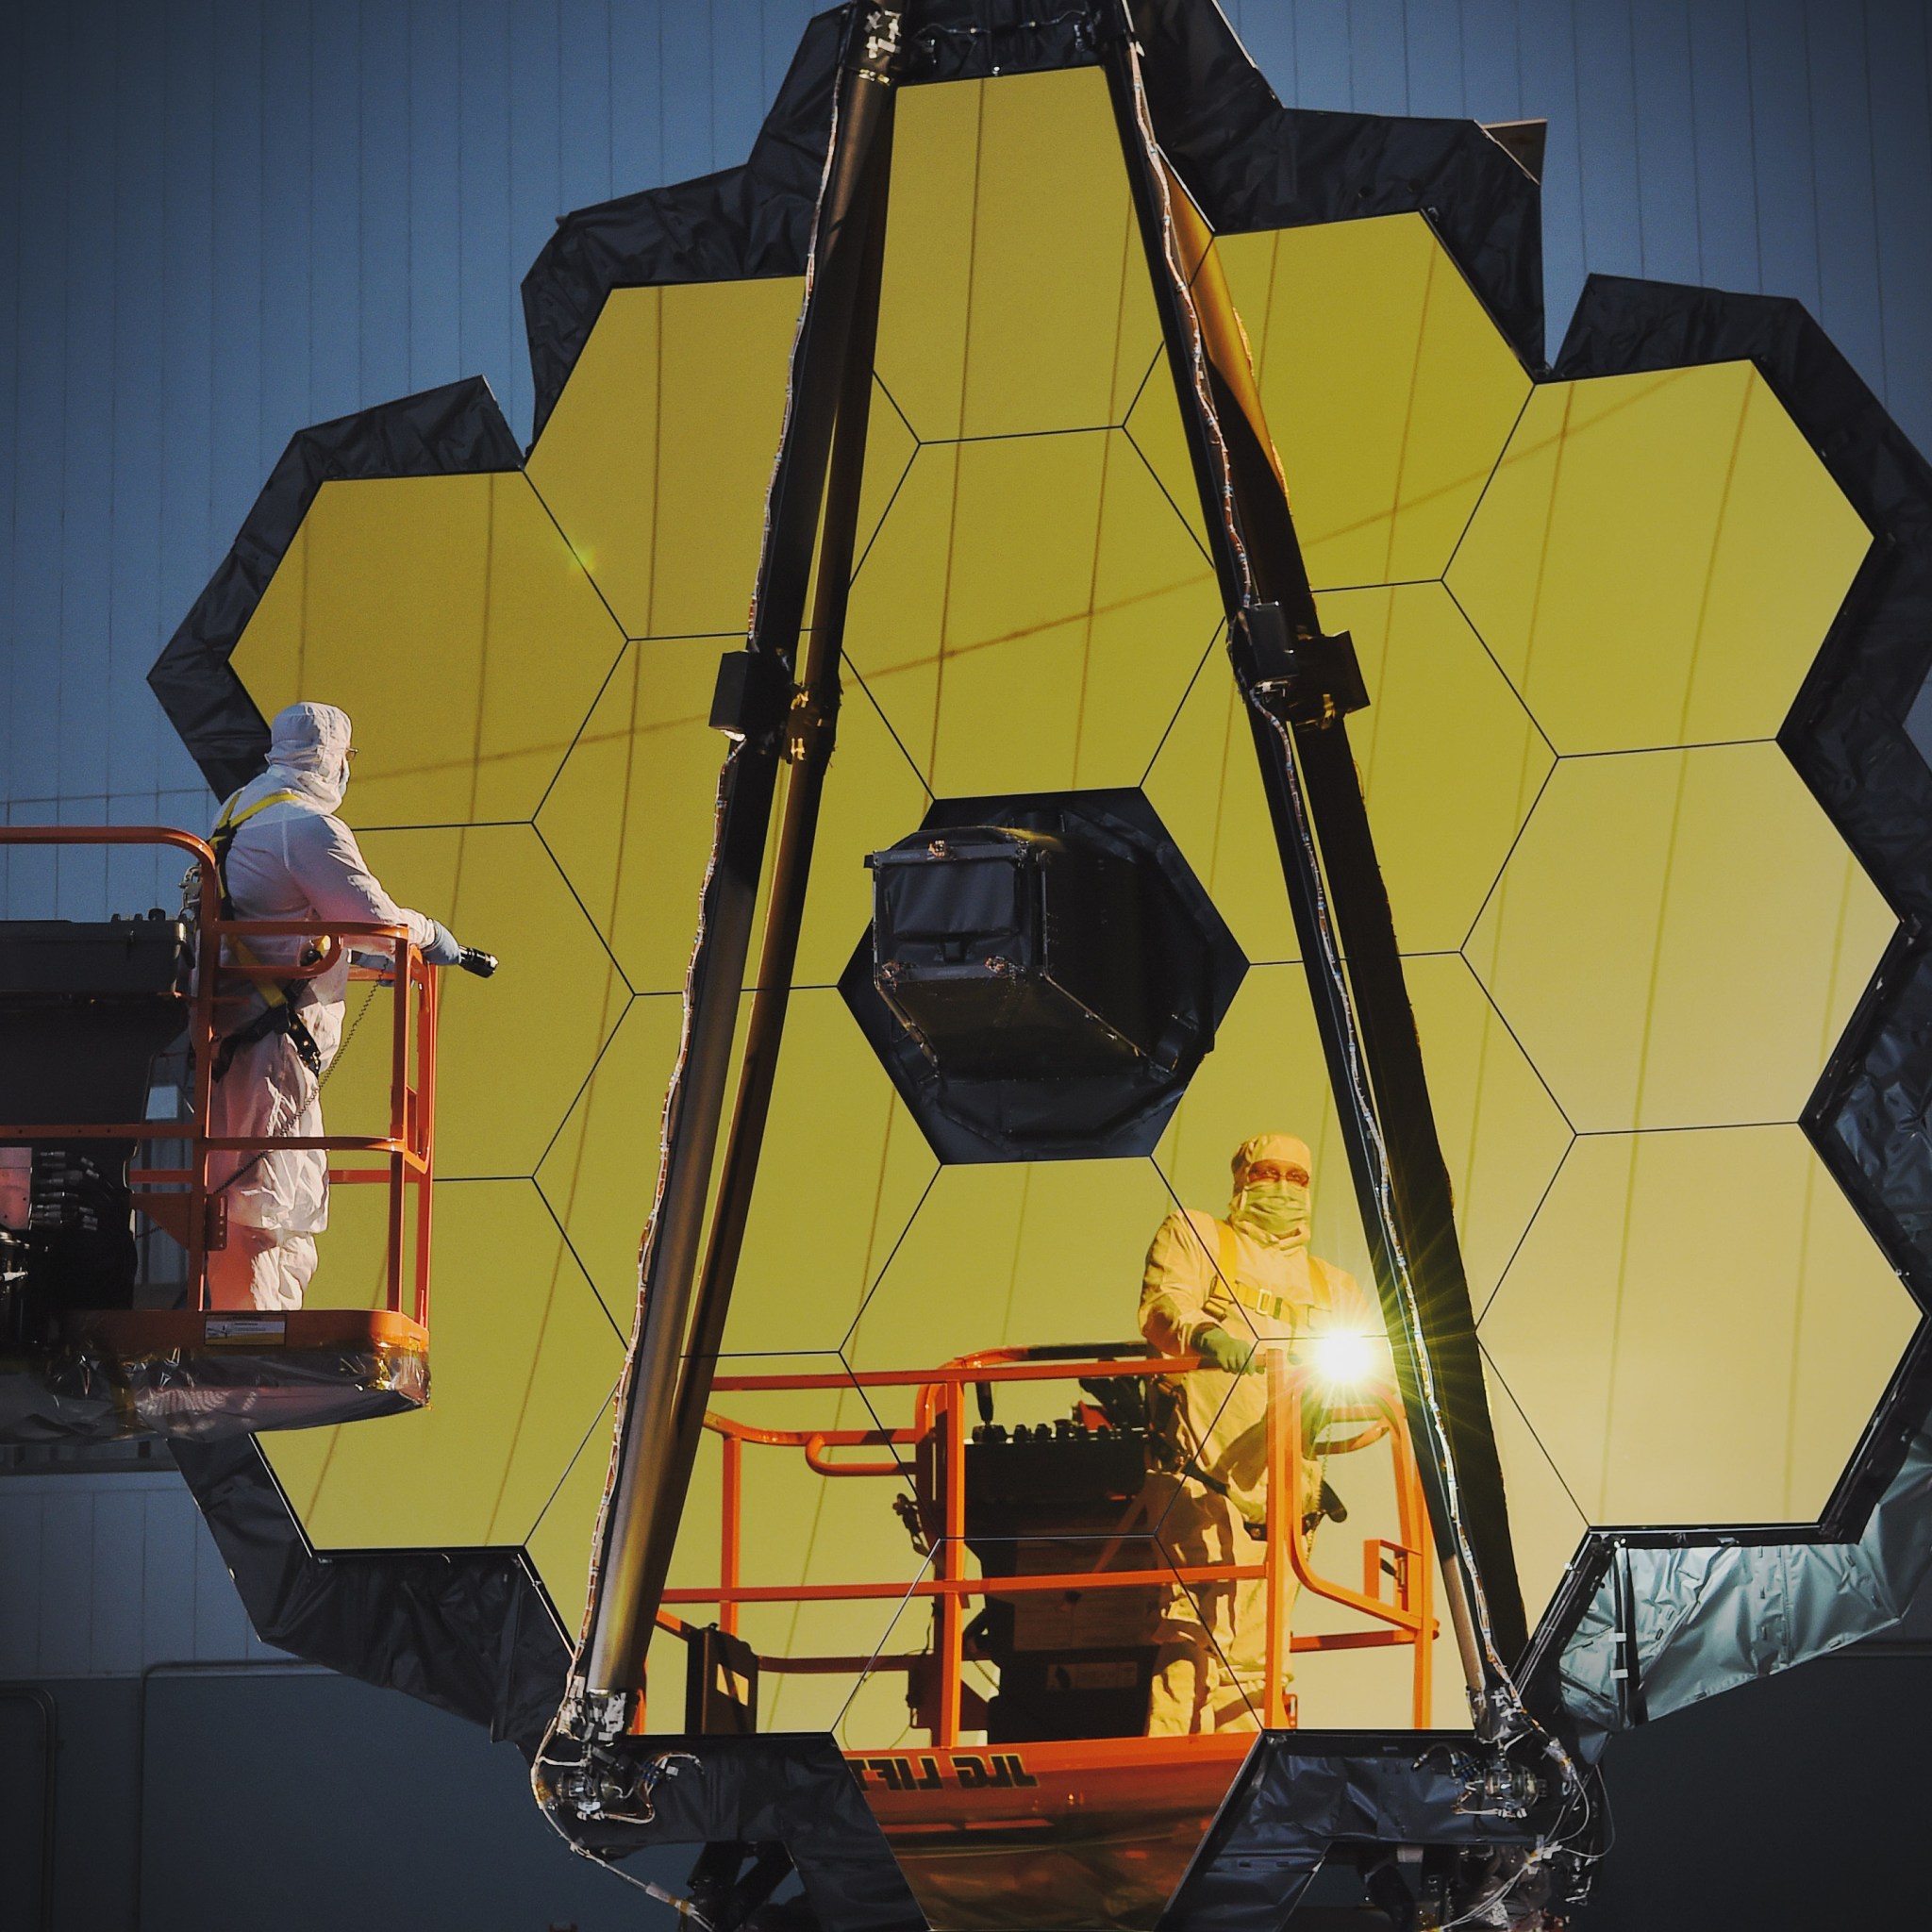 Engineers conduct a "Center of Curvature" test on NASA's James Webb Space Telescope.